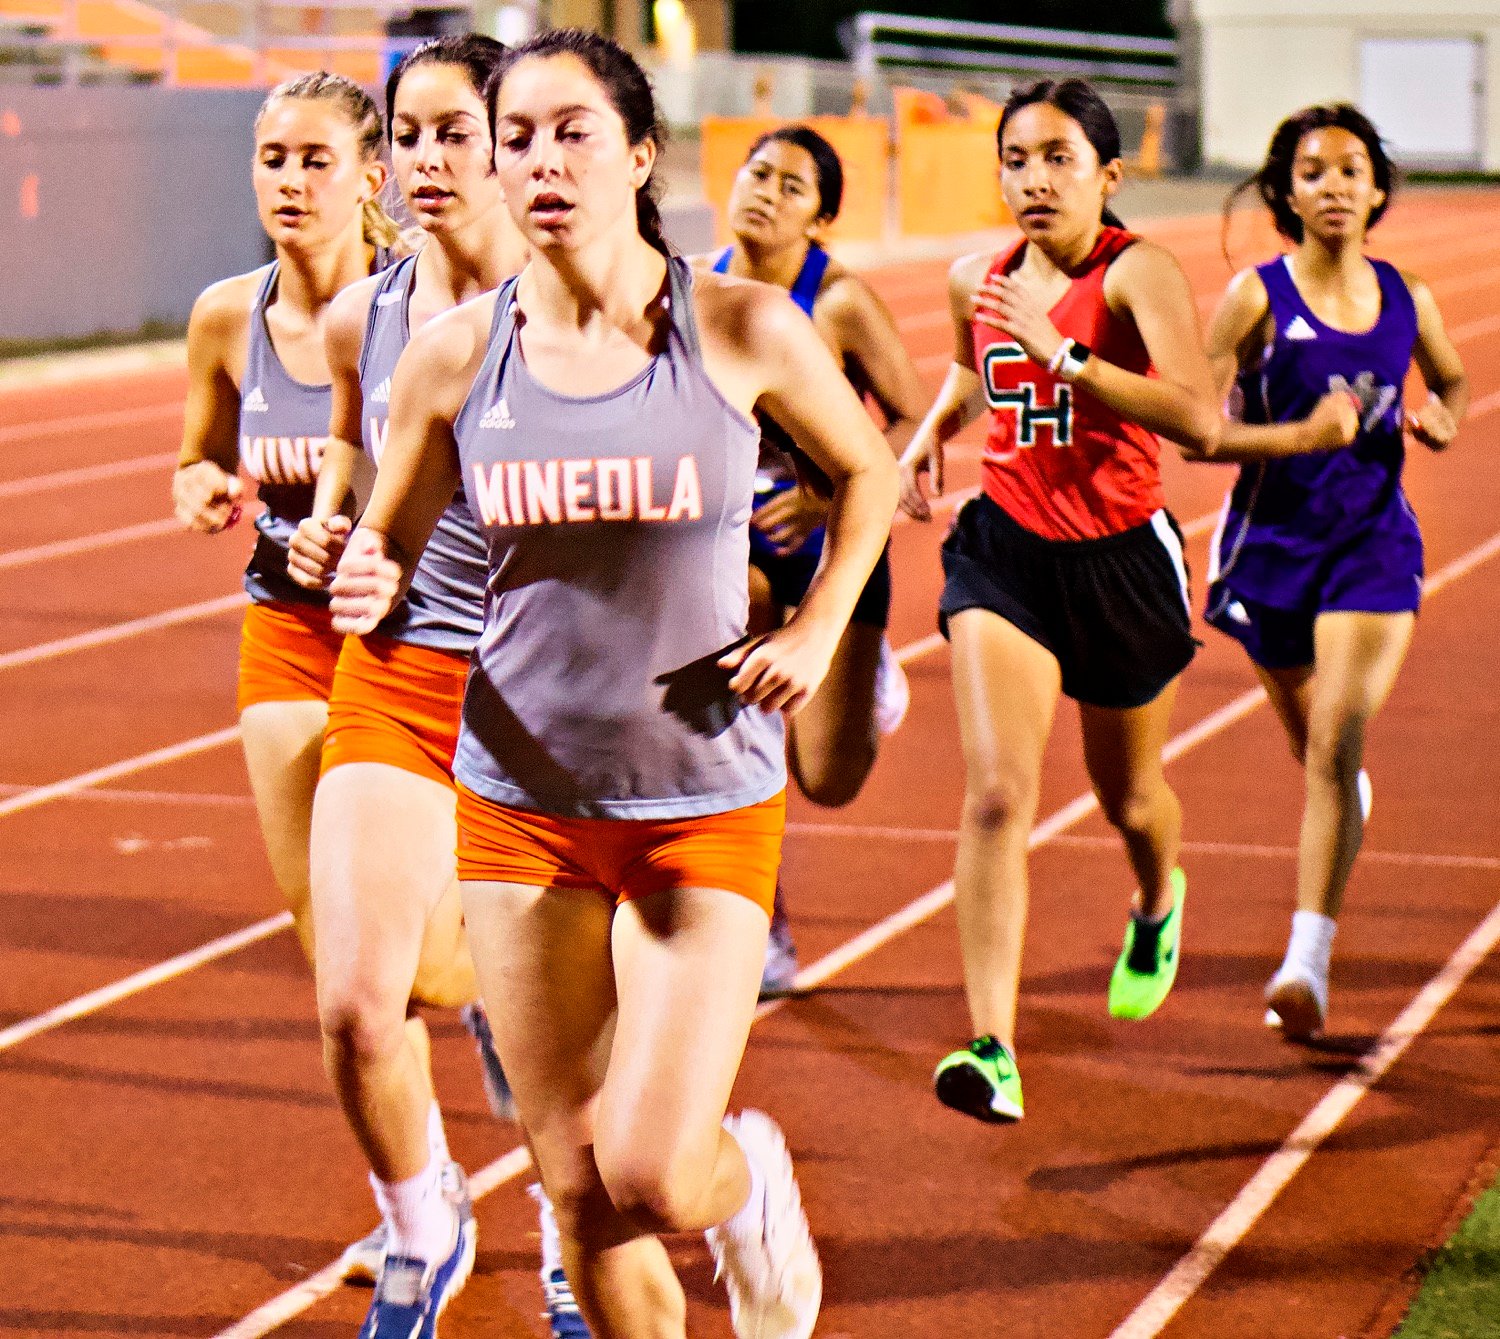 Left to right, Hannah Zock, Keilee Riley and Kapri Riley of Mineola finished 4th, 2nd and 3rd respectively in the 1600 meter race. [run, don't walk, for more shots]